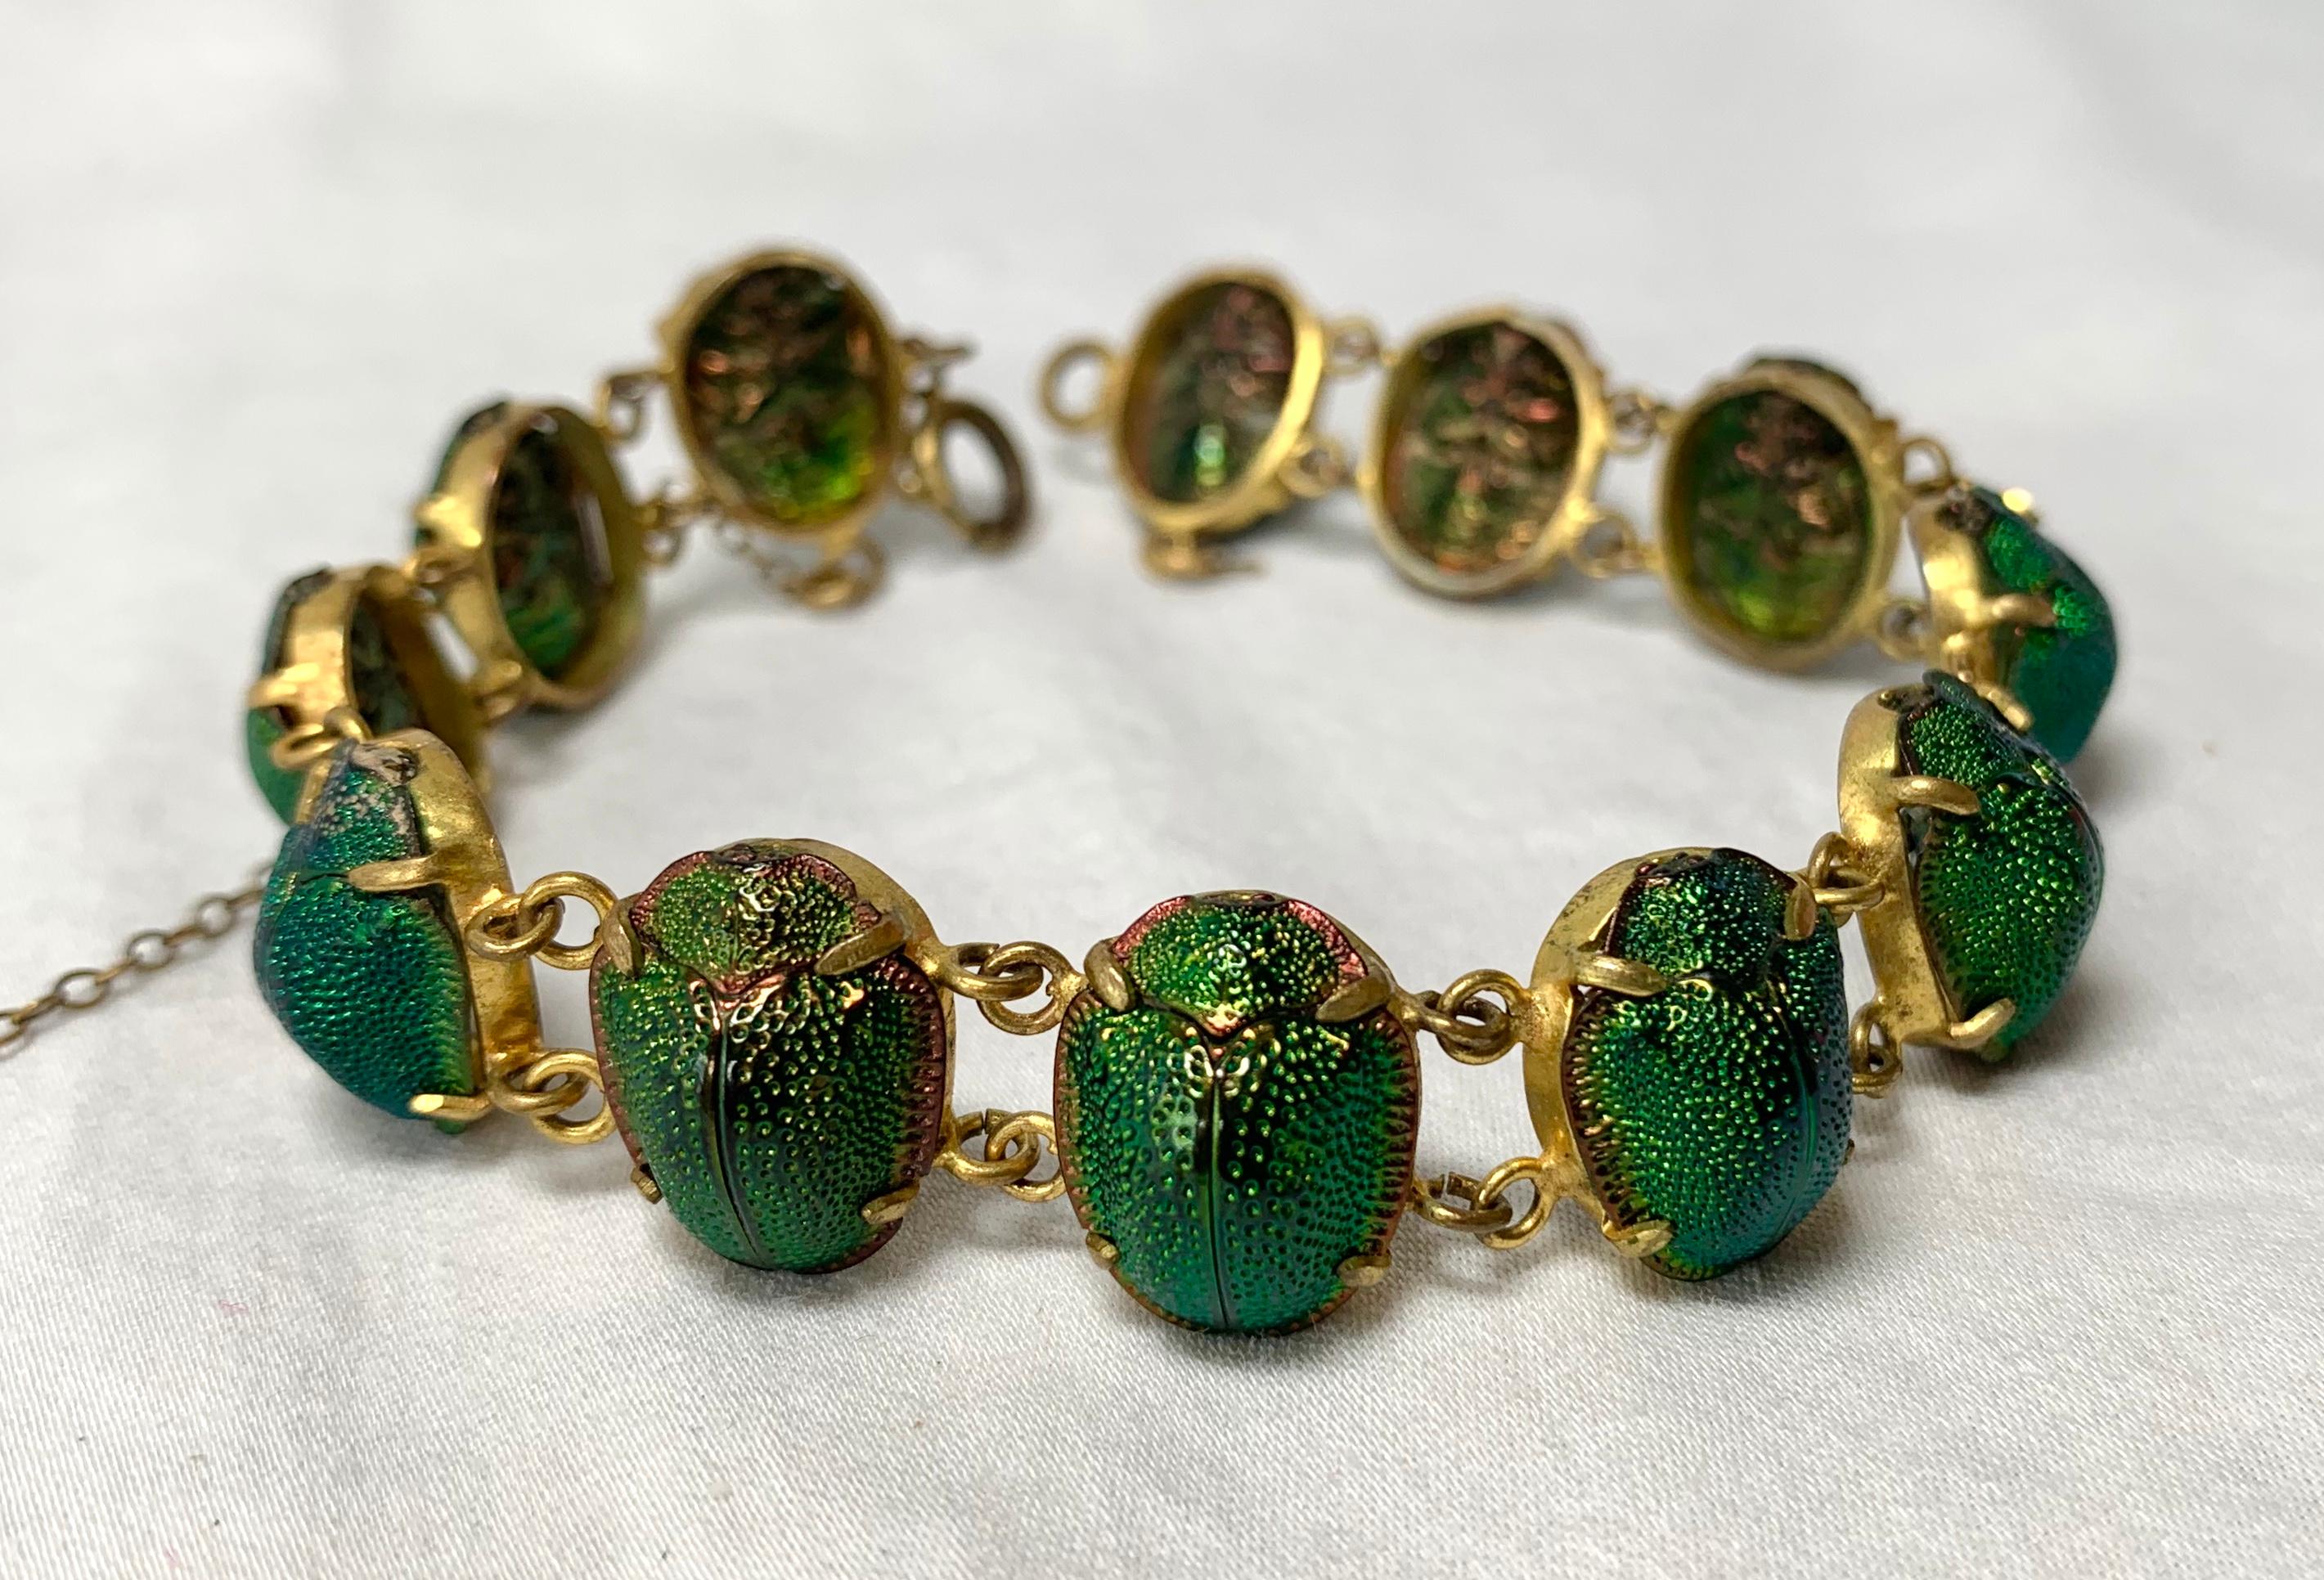 Vintage 12k Yellow Gold Filled Scarab Bracelet Retro 1950s Carved Gem  Egyptian Revival Beetle Jewelry Hallmarked CC for Curtis Creations - Etsy | Scarab  bracelet, Jewelry, Scarab